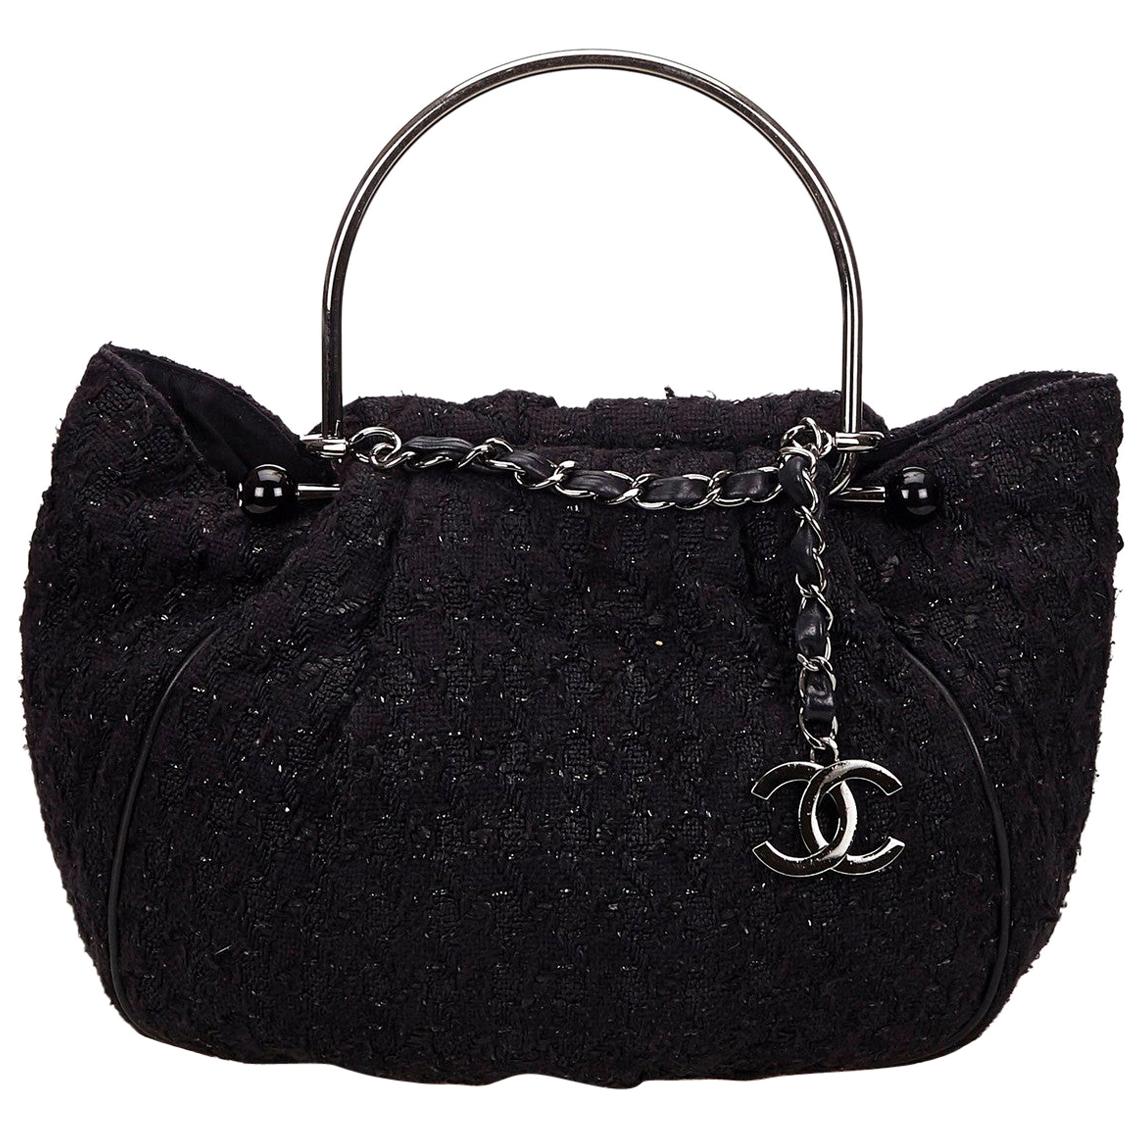 Black Chanel 2005 Tweed Limited Edition Collector’s Large Novelty Tote Top Handle Bag For Sale